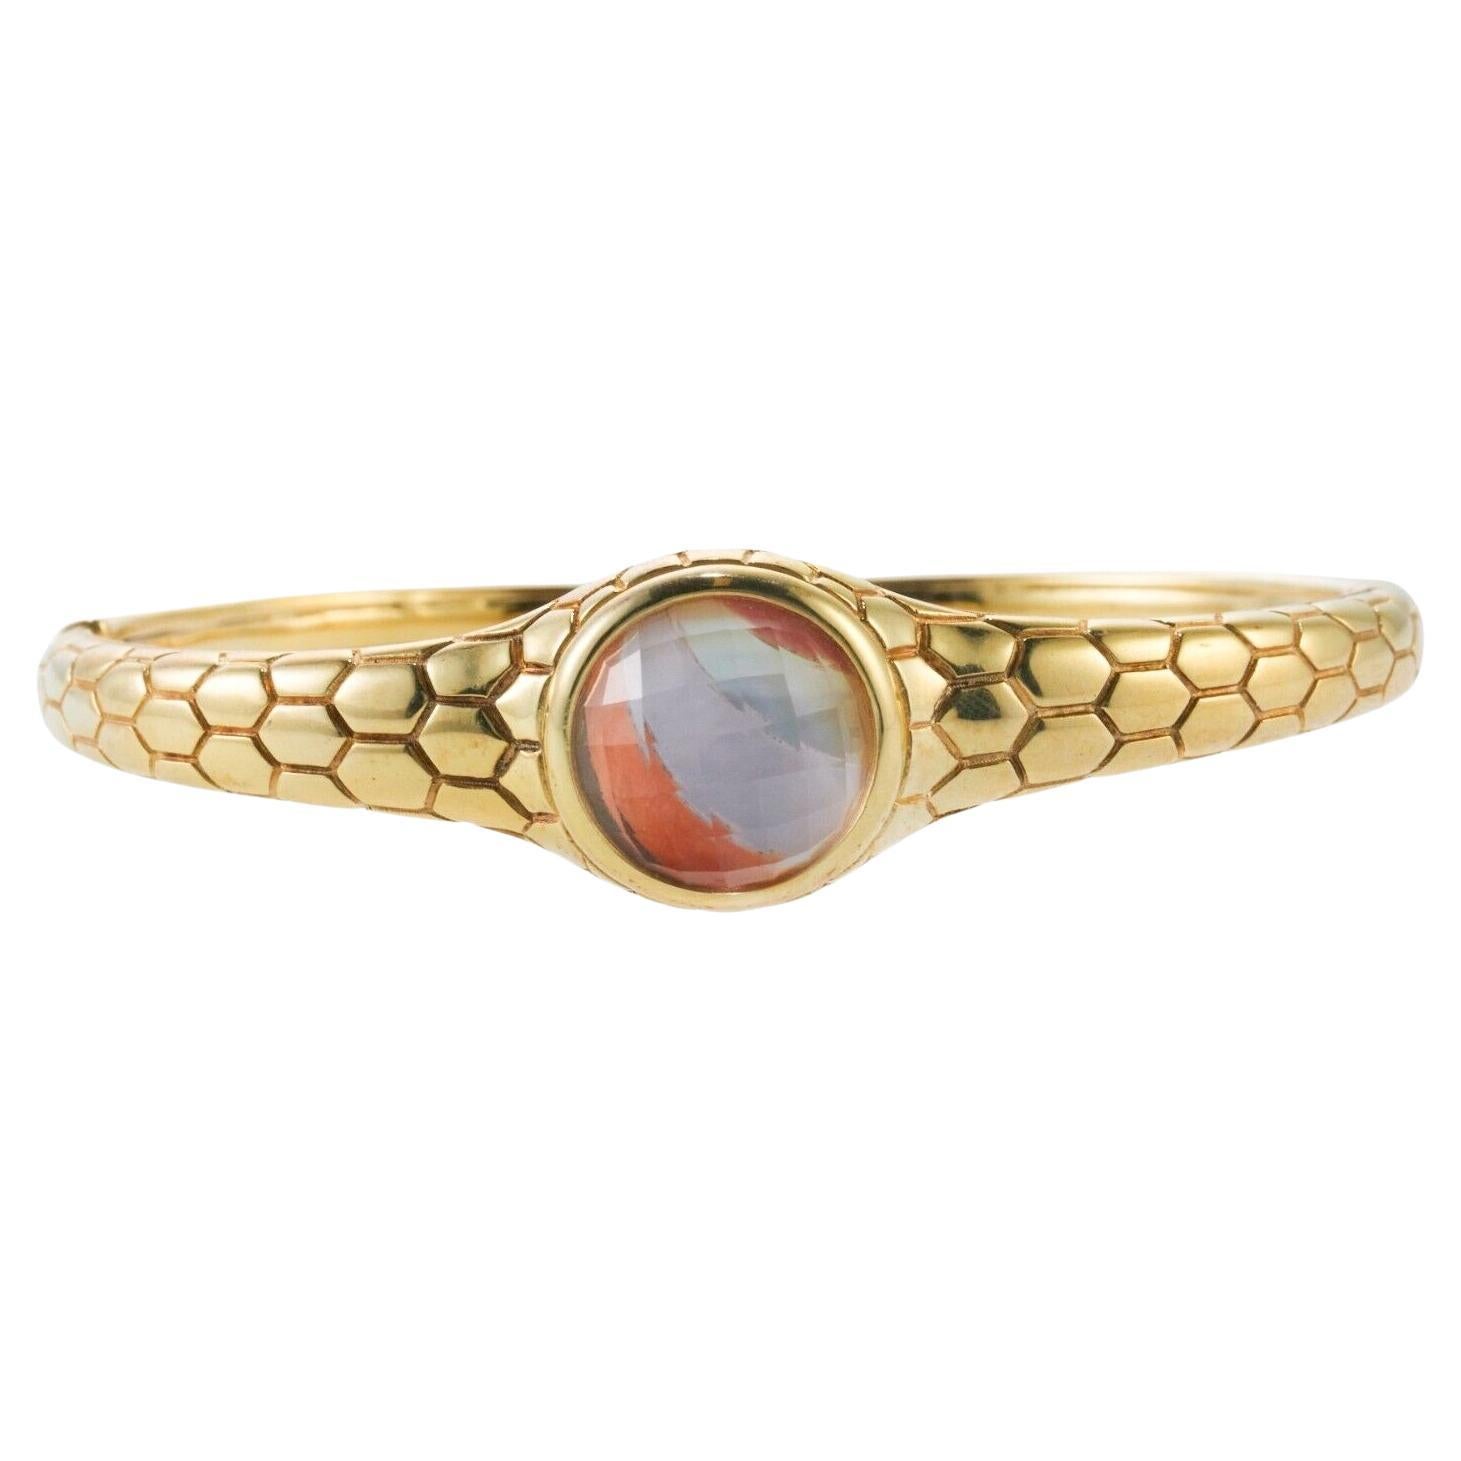 Asch Grossbardt Inlay Mother of Pearl Coral Crystal Gold Bangle Bracelet